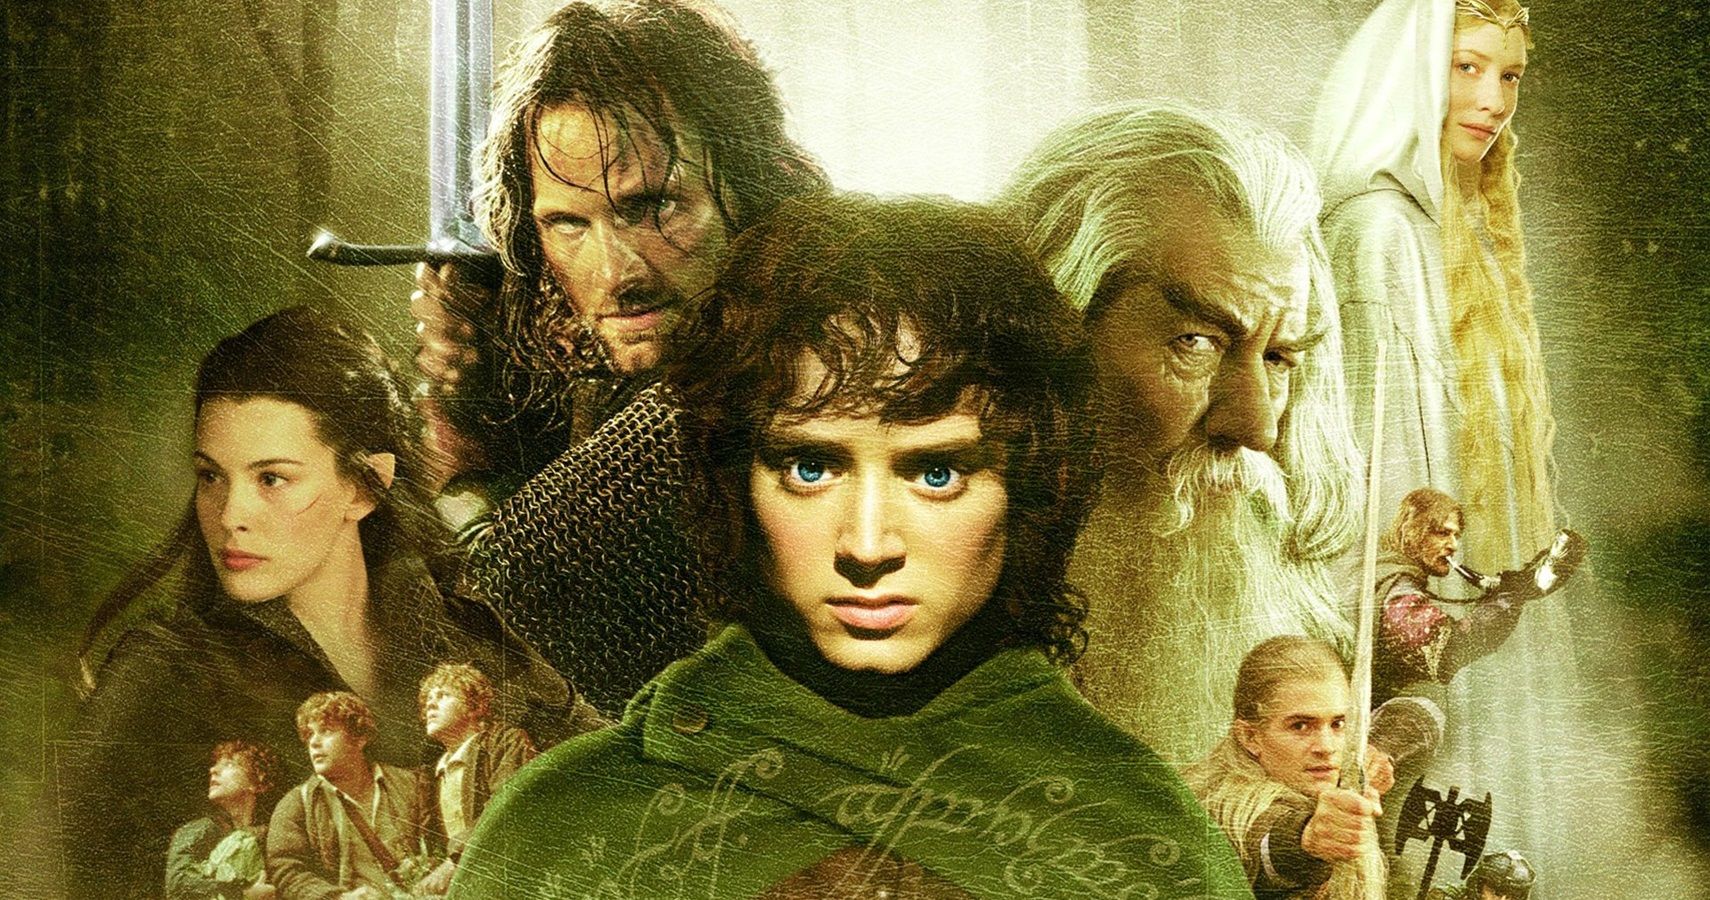 IGN - The Lord of the Rings: The Rings of Power Season 1... | Facebook